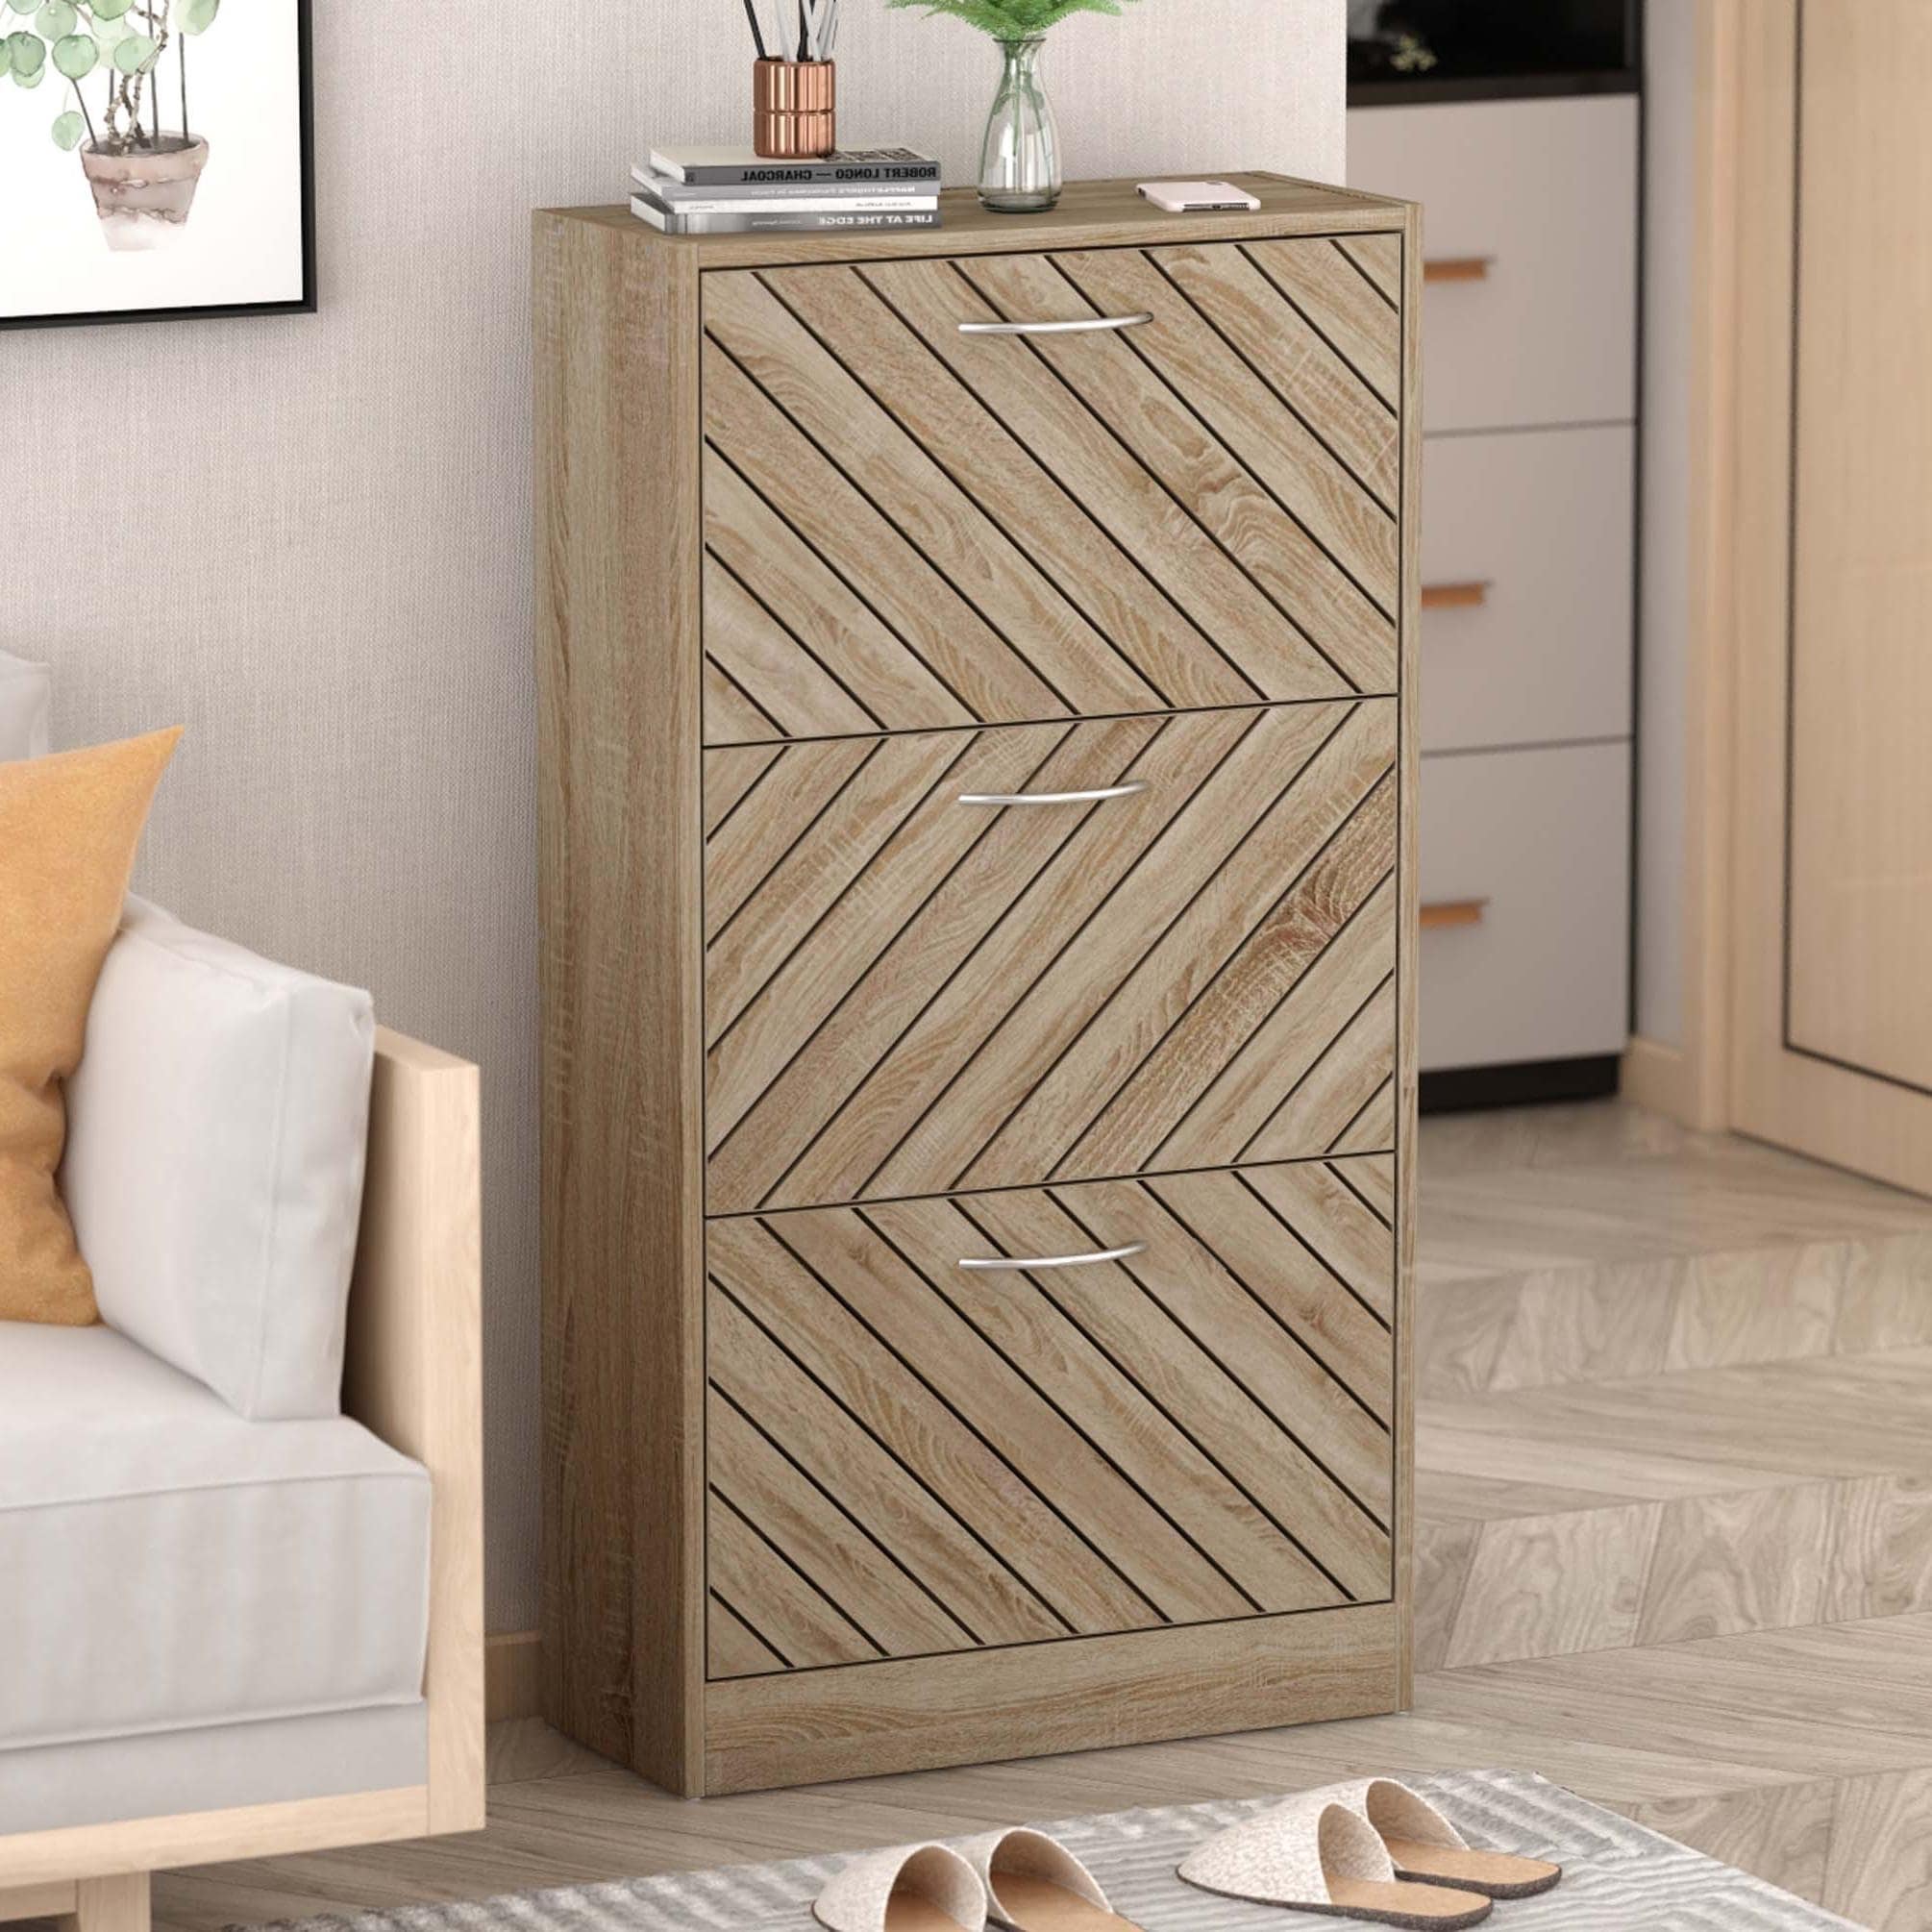 https://ak1.ostkcdn.com/images/products/is/images/direct/b0ab857fd10dfe01744d143c234b324c412e9a05/22.4%22W-Three-Drawers-Shoe-Storage-Cabinet%2CFold-out-Drawer.jpg